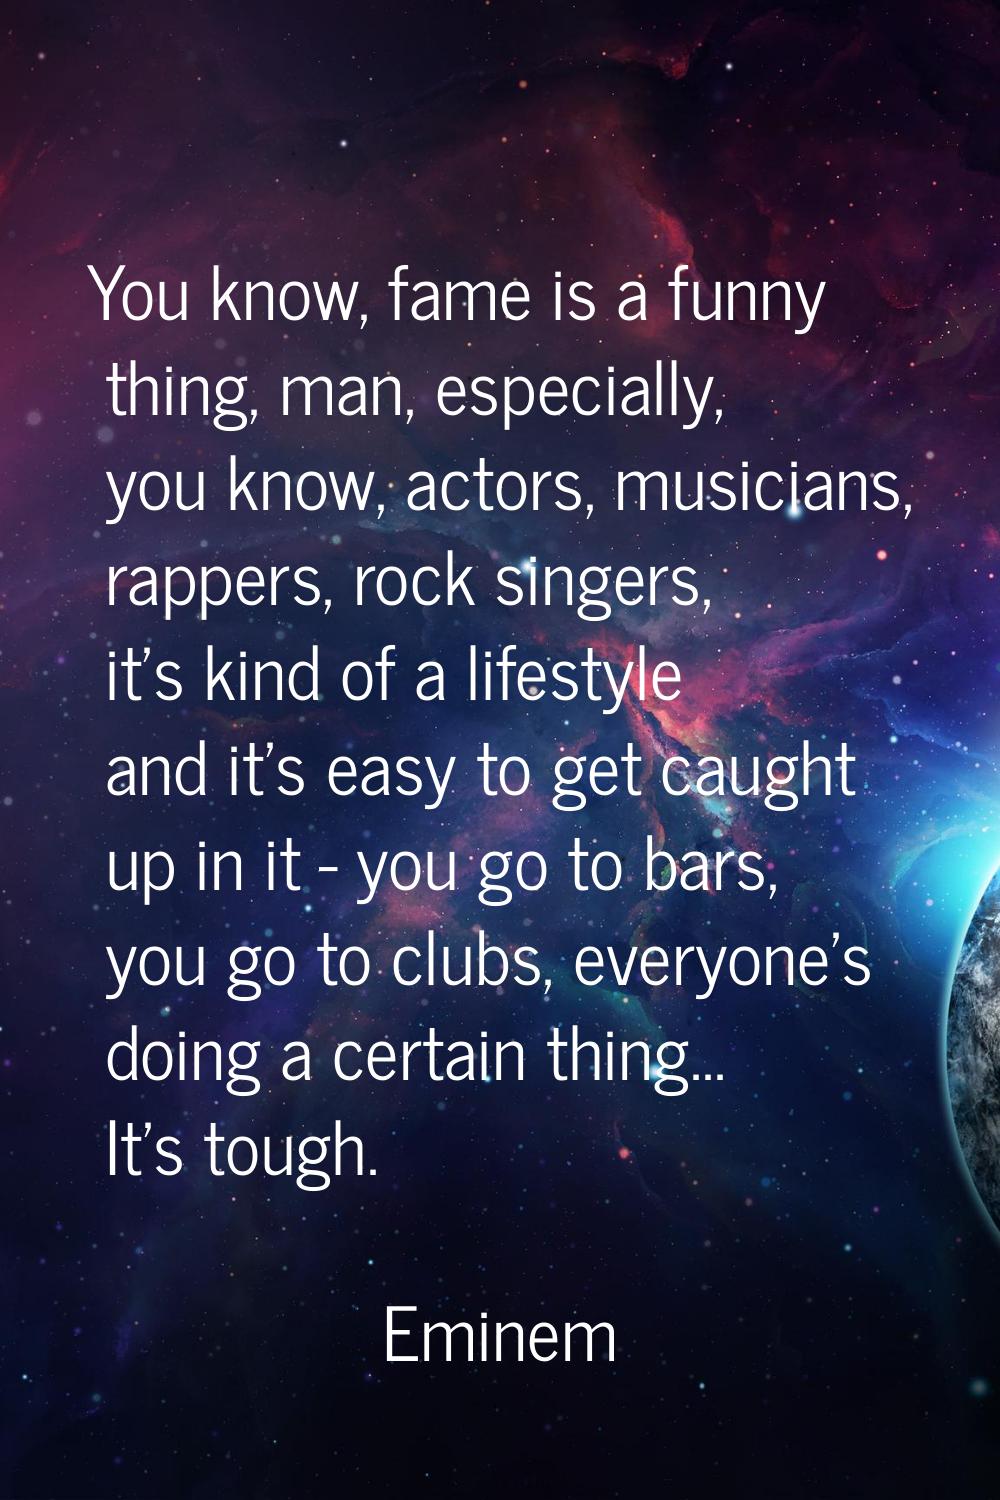 You know, fame is a funny thing, man, especially, you know, actors, musicians, rappers, rock singer